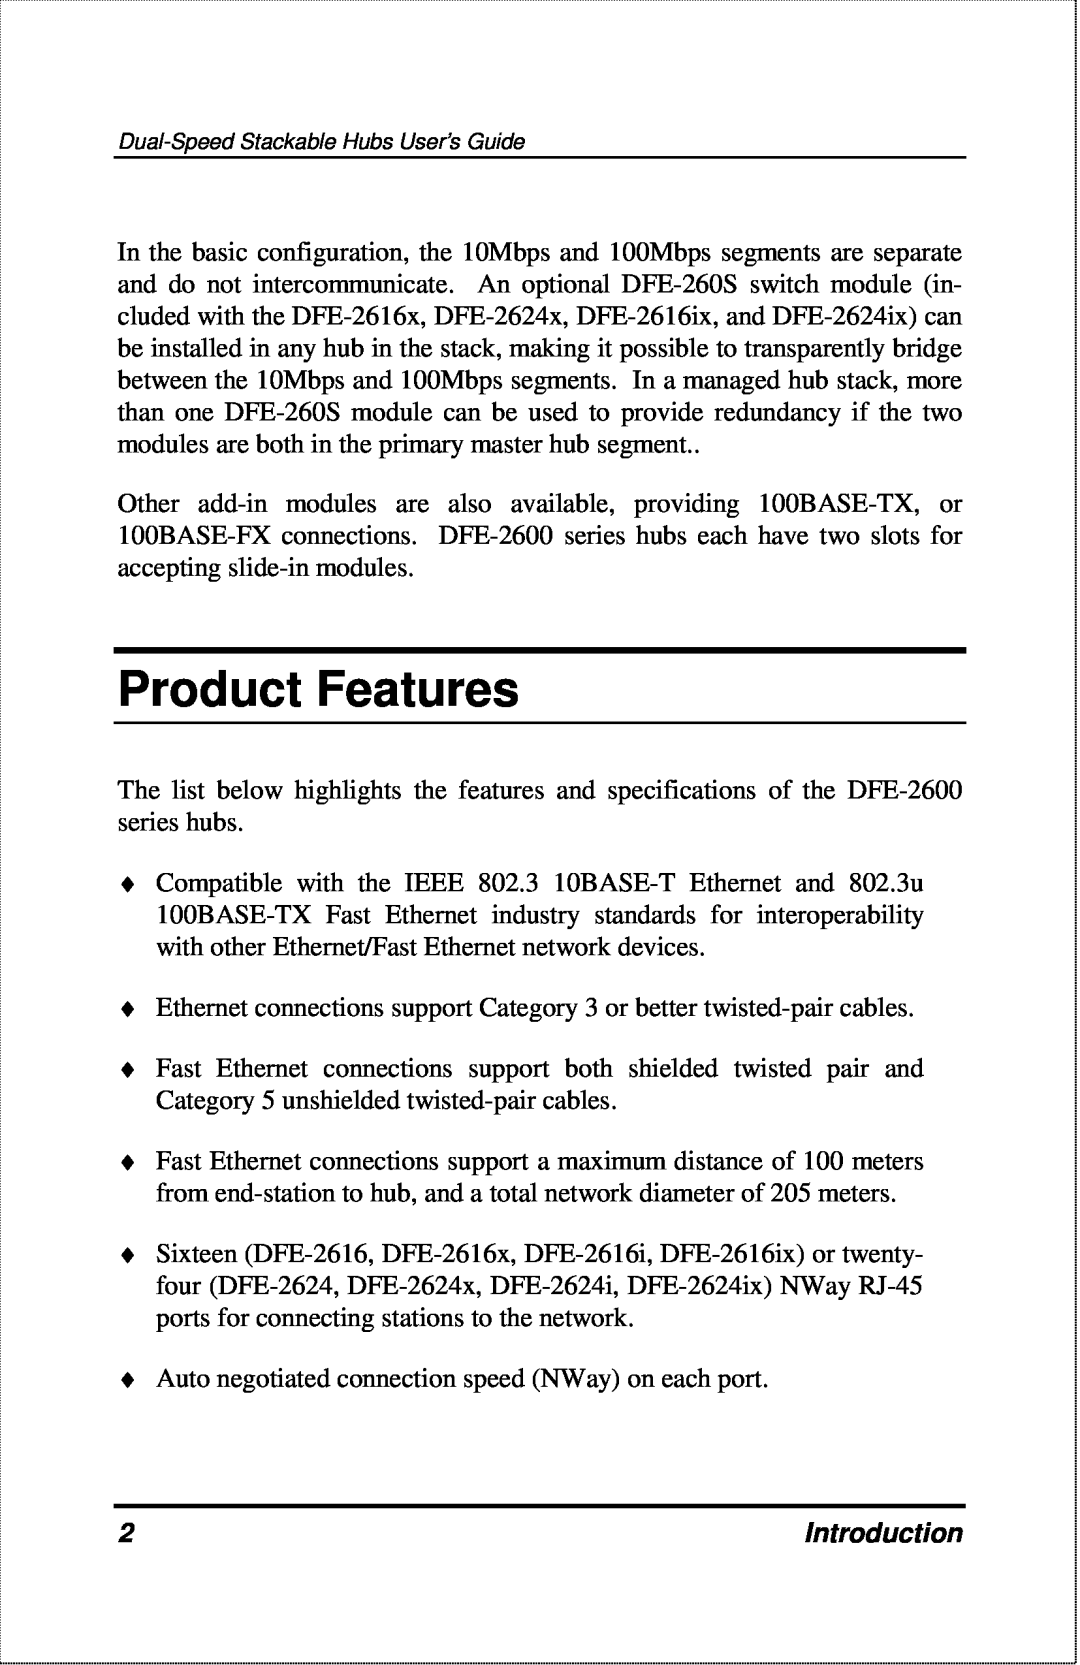 D-Link DFE-2600 manual Product Features, Introduction 